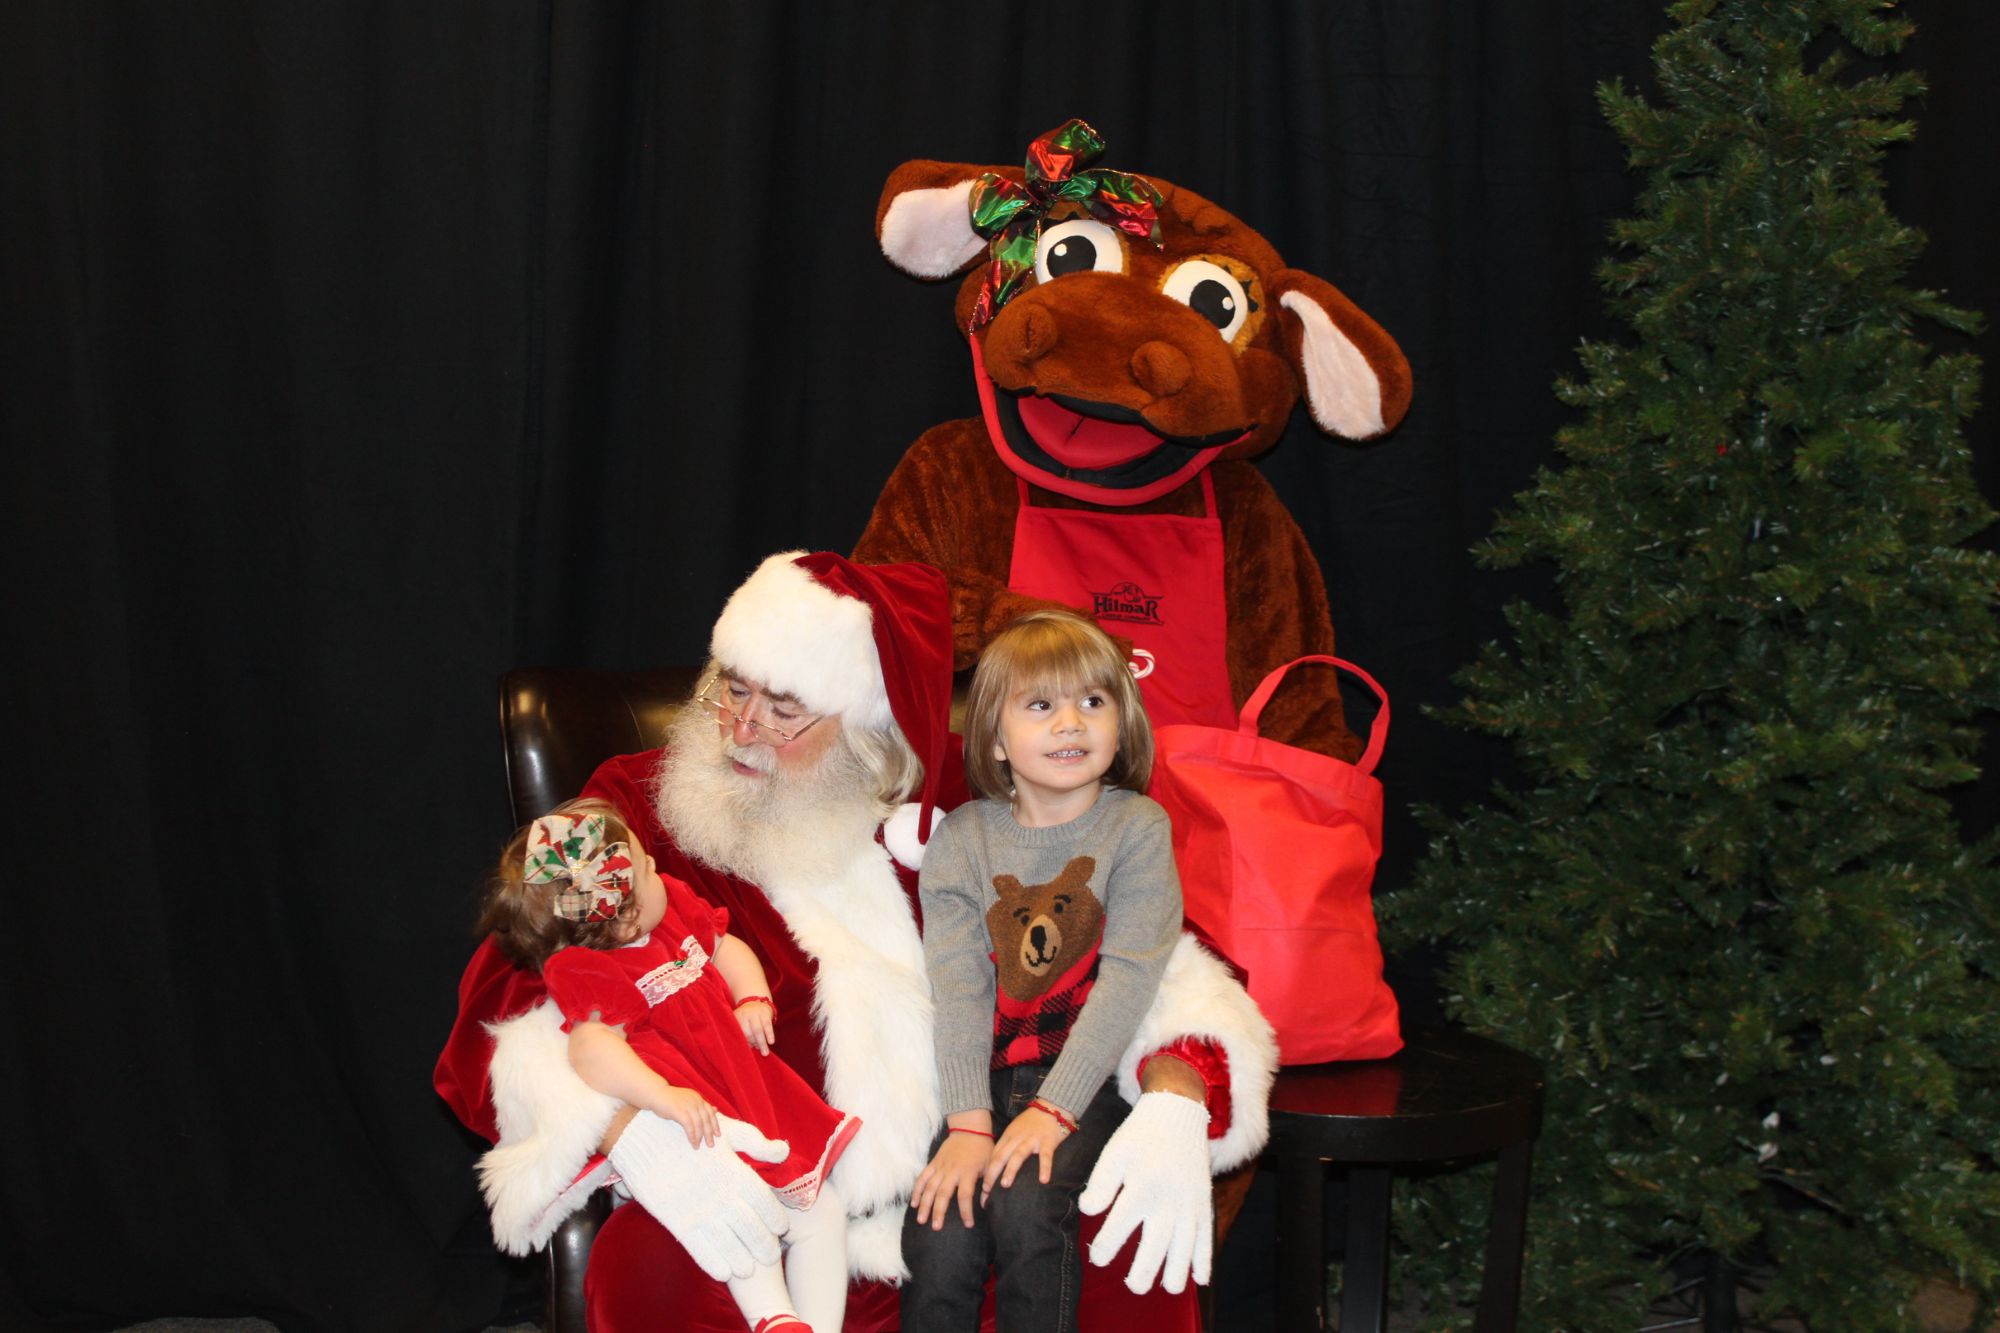 Santa, Daisy and two children pose for photo